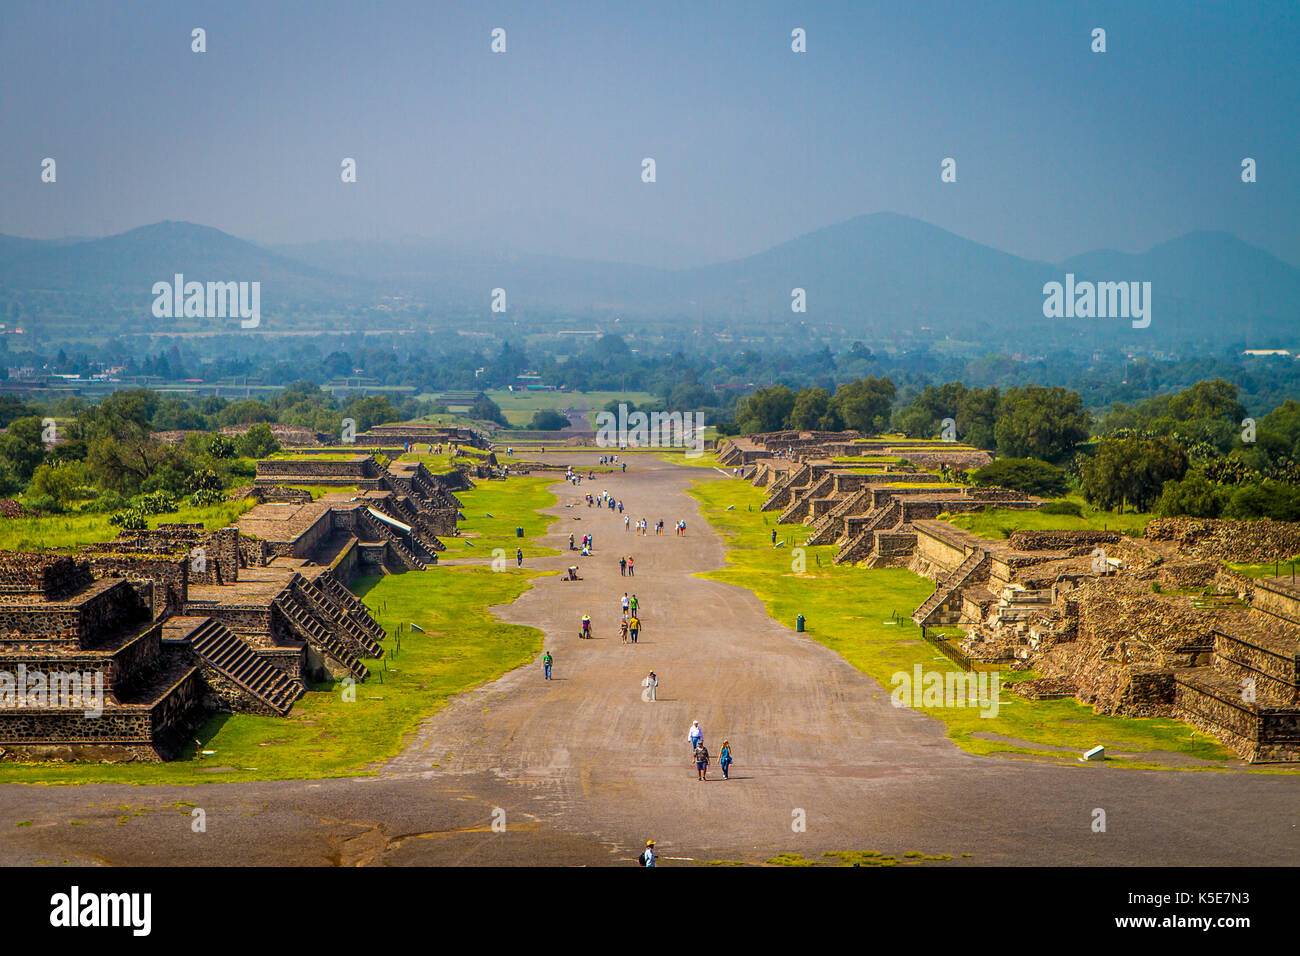 Avenue of the Dead, Teotihuacan, Mexique Banque D'Images